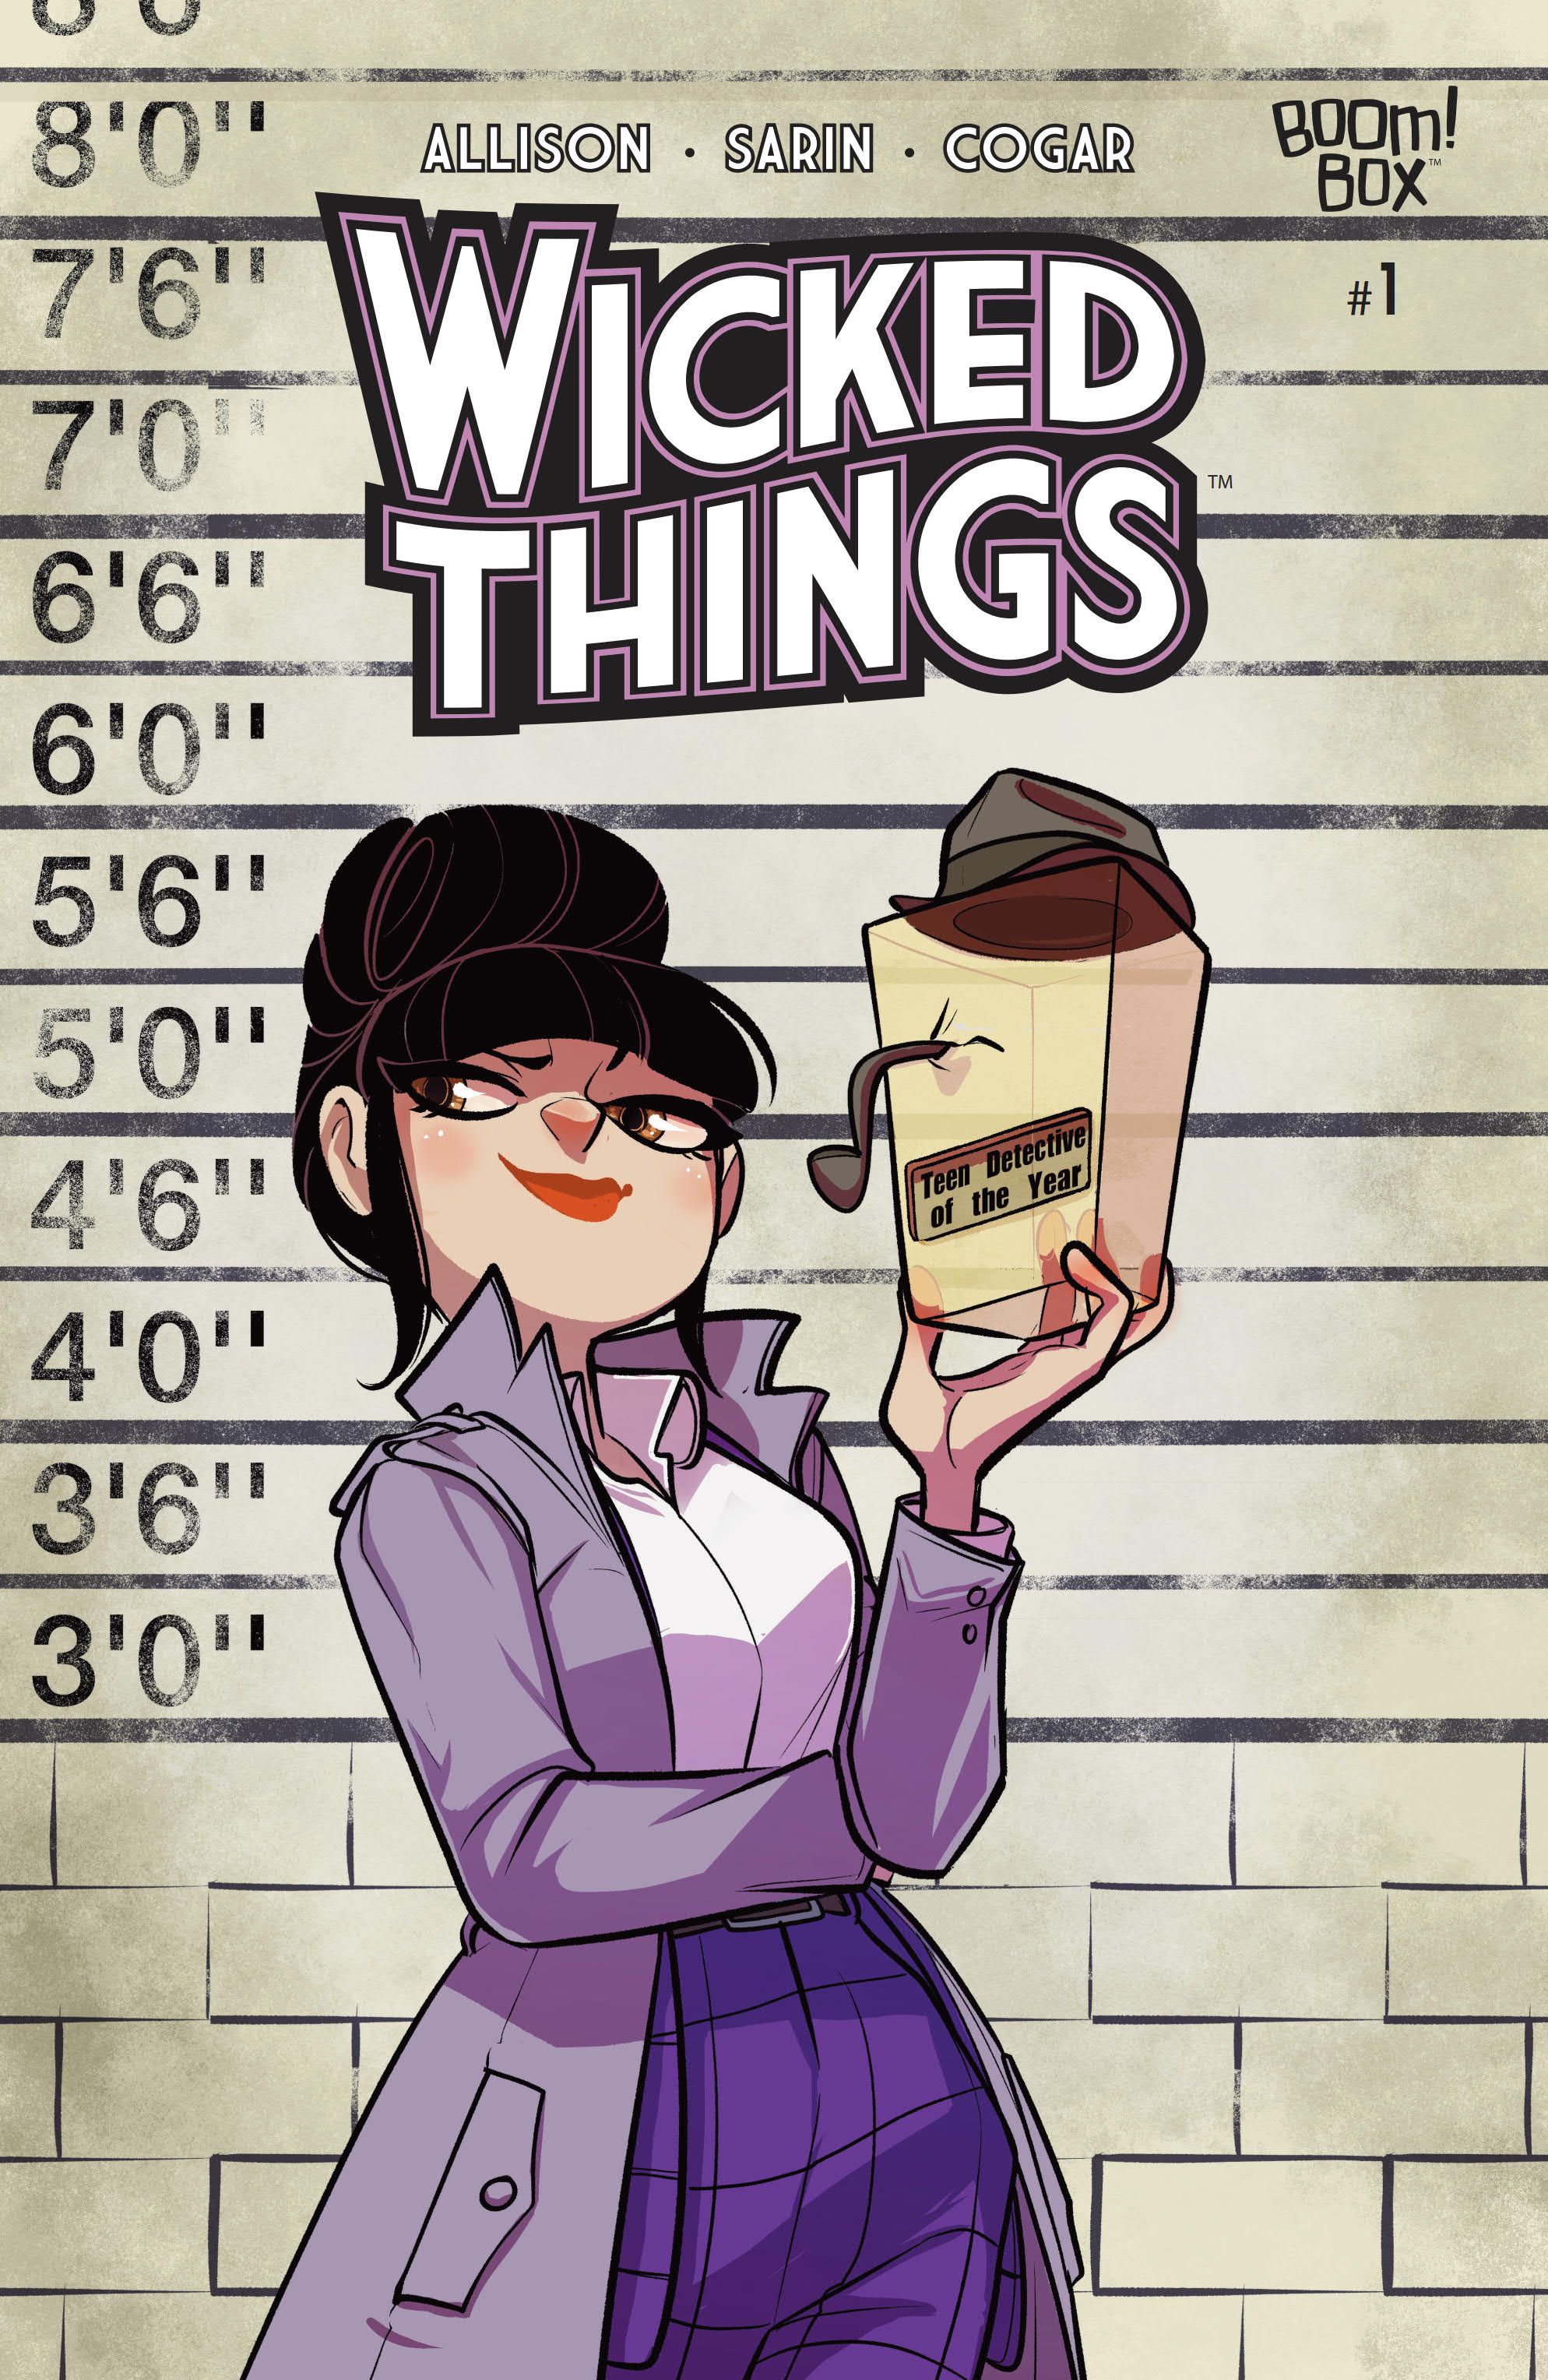 Wicked Things #1 main cover by Max Sarin